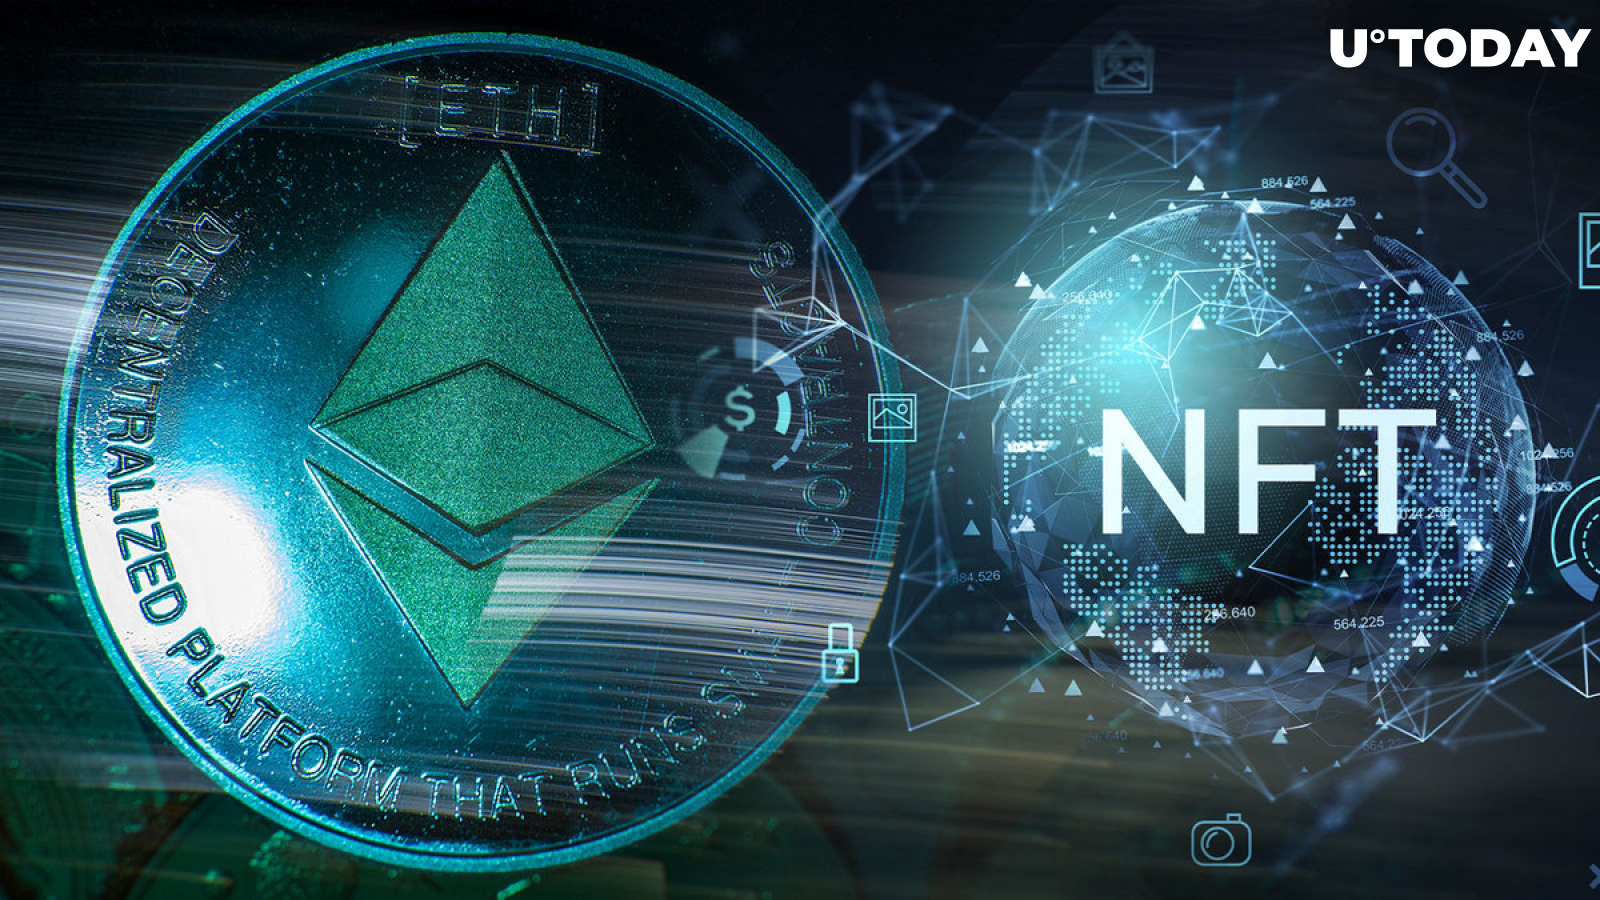 EthereumPoW (ETHW) Receives New NFTs and DeFi Functionality